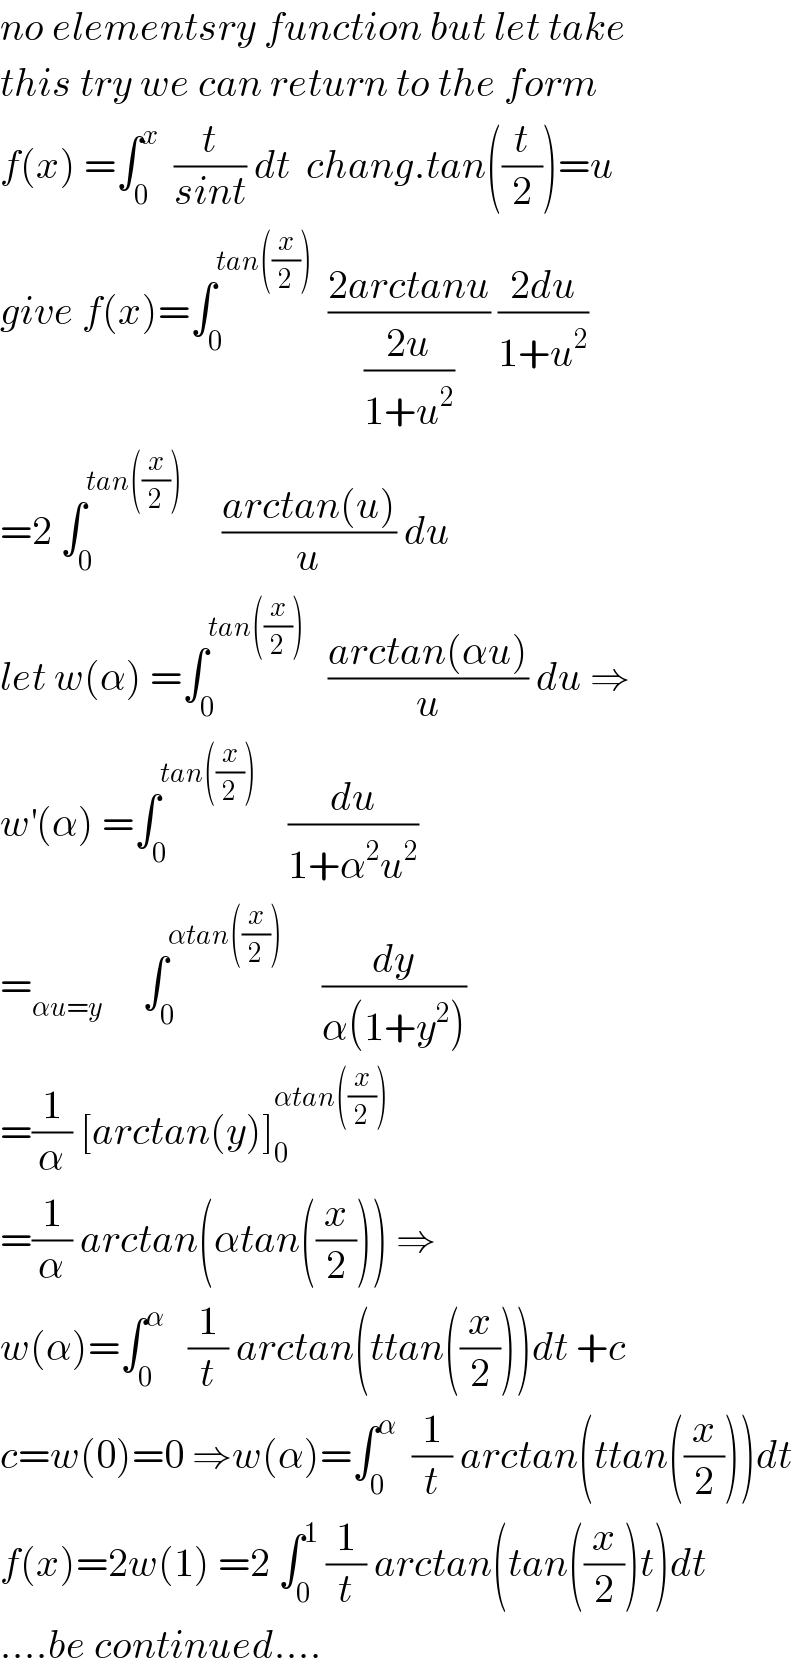 no elementsry function but let take  this try we can return to the form  f(x) =∫_0 ^x   (t/(sint)) dt  chang.tan((t/2))=u  give f(x)=∫_0 ^(tan((x/2)))   ((2arctanu)/((2u)/(1+u^2 ))) ((2du)/(1+u^2 ))  =2 ∫_0 ^(tan((x/2)))      ((arctan(u))/u) du  let w(α) =∫_0 ^(tan((x/2)))    ((arctan(αu))/u) du ⇒  w^′ (α) =∫_0 ^(tan((x/2)))     (du/(1+α^2 u^2 ))  =_(αu=y)      ∫_0 ^(αtan((x/2)))      (dy/(α(1+y^2 )))  =(1/α) [arctan(y)]_0 ^(αtan((x/2)))   =(1/α) arctan(αtan((x/2))) ⇒  w(α)=∫_0 ^α    (1/t) arctan(ttan((x/2)))dt +c  c=w(0)=0 ⇒w(α)=∫_0 ^α   (1/t) arctan(ttan((x/2)))dt  f(x)=2w(1) =2 ∫_0 ^1  (1/t) arctan(tan((x/2))t)dt  ....be continued....  